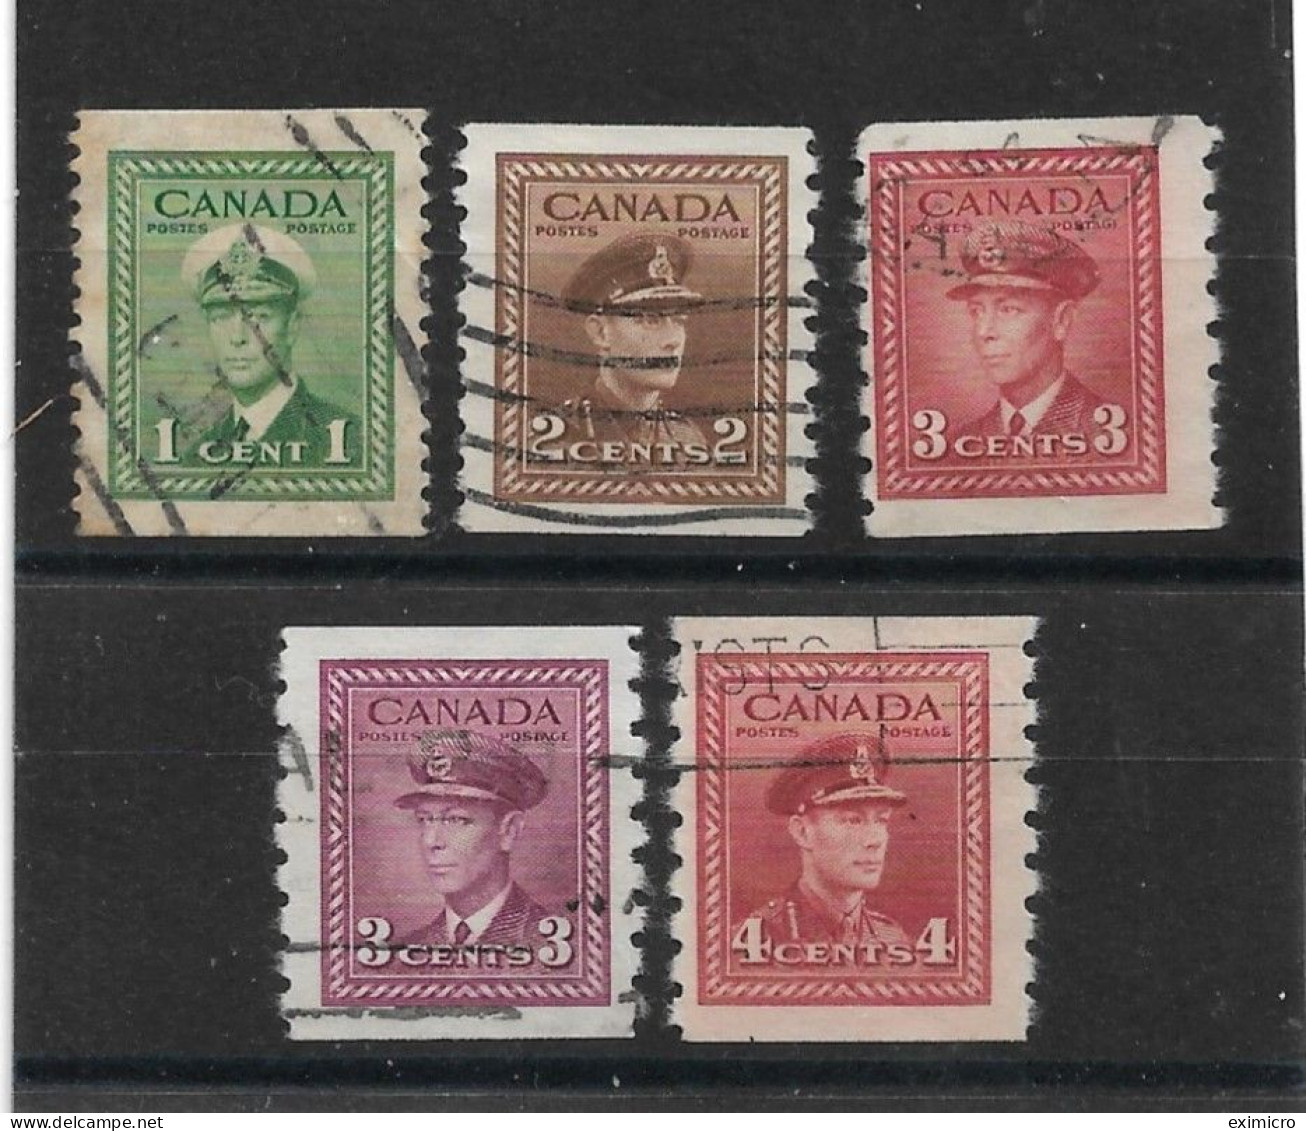 CANADA 1942 - 1943 COIL STAMPS SET IMPERF X PERF 8 SG 389/393 FINE USED Cat £26 - Gebruikt